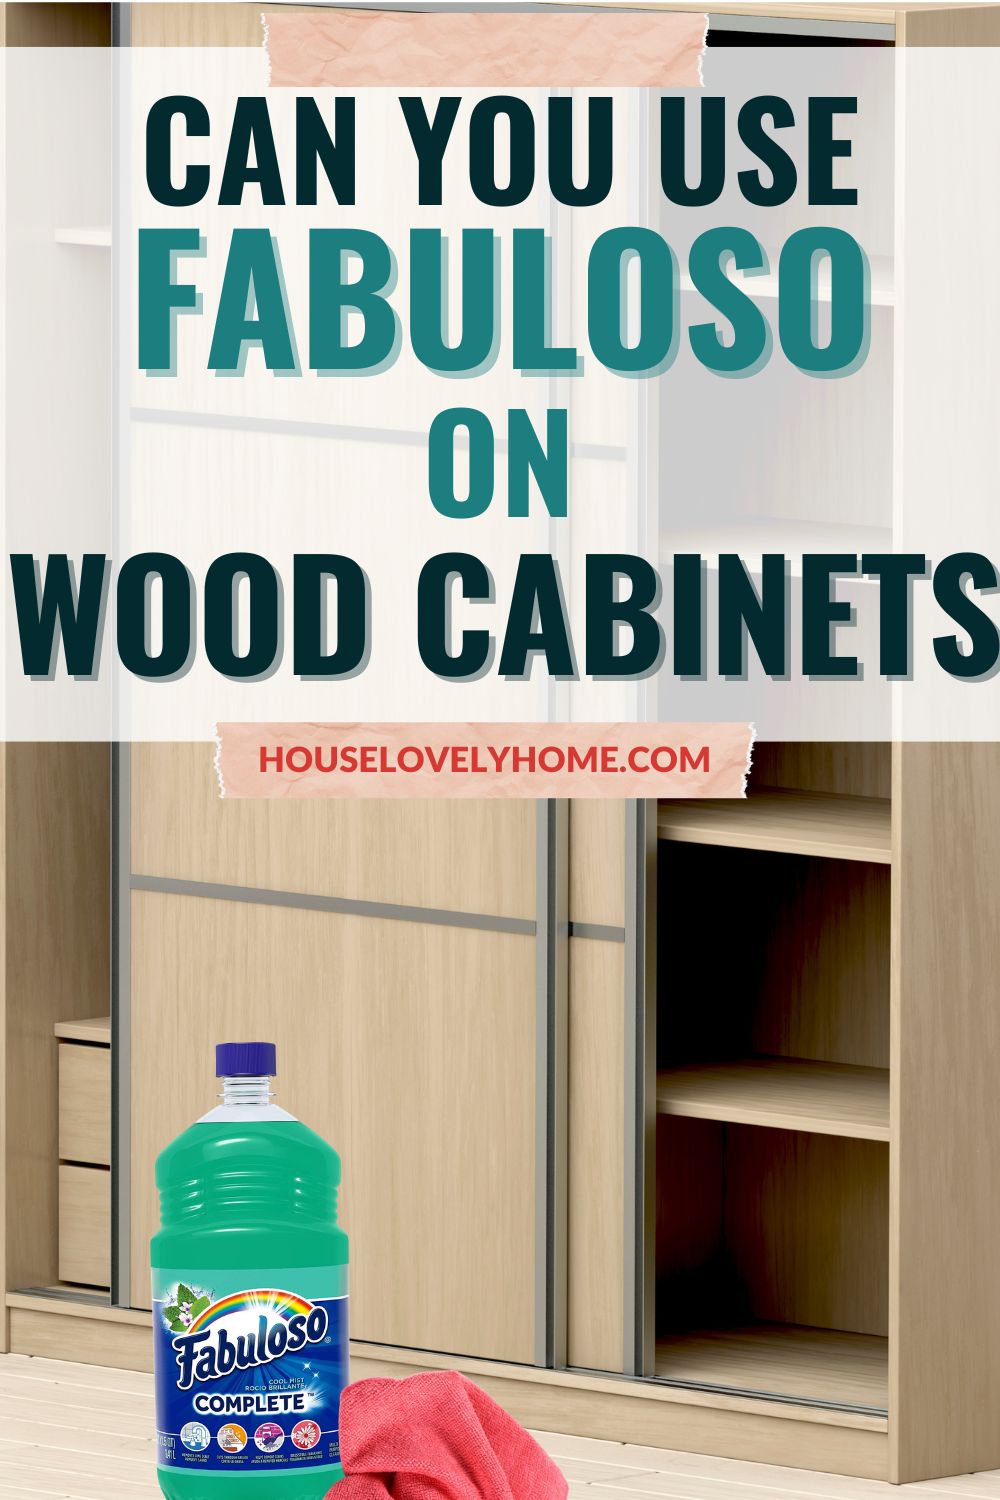 Image showing a large wooden cabinet, with fabuloso and a cleaning cloth on the floor with text overlay that reads Can You Use Fabuloso on Wood Cabinets